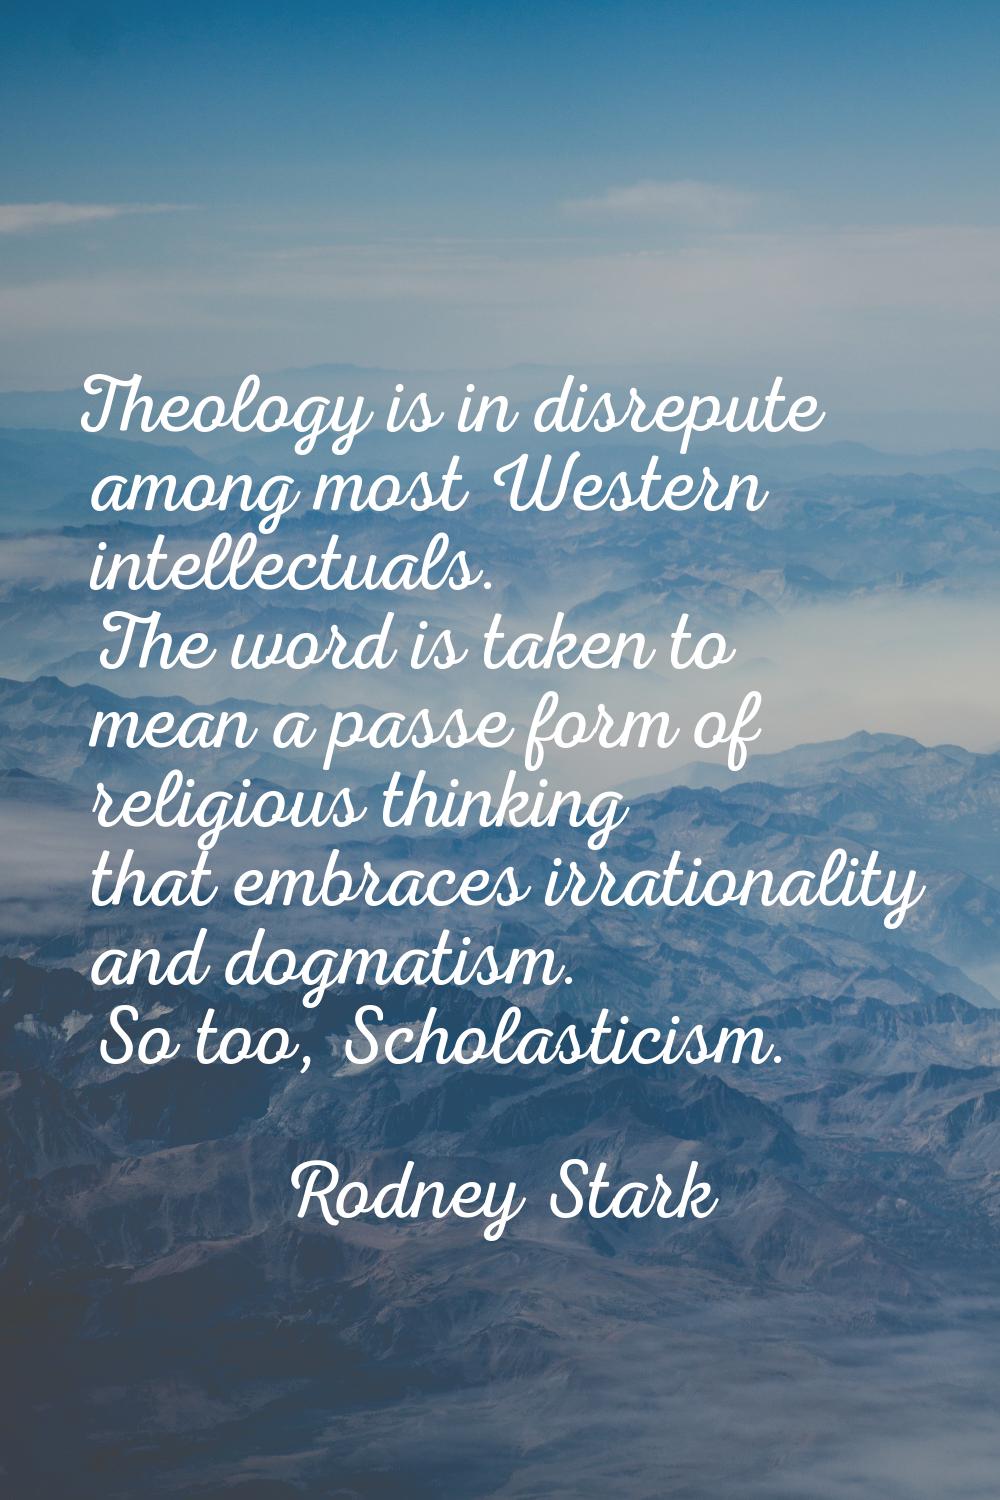 Theology is in disrepute among most Western intellectuals. The word is taken to mean a passe form o